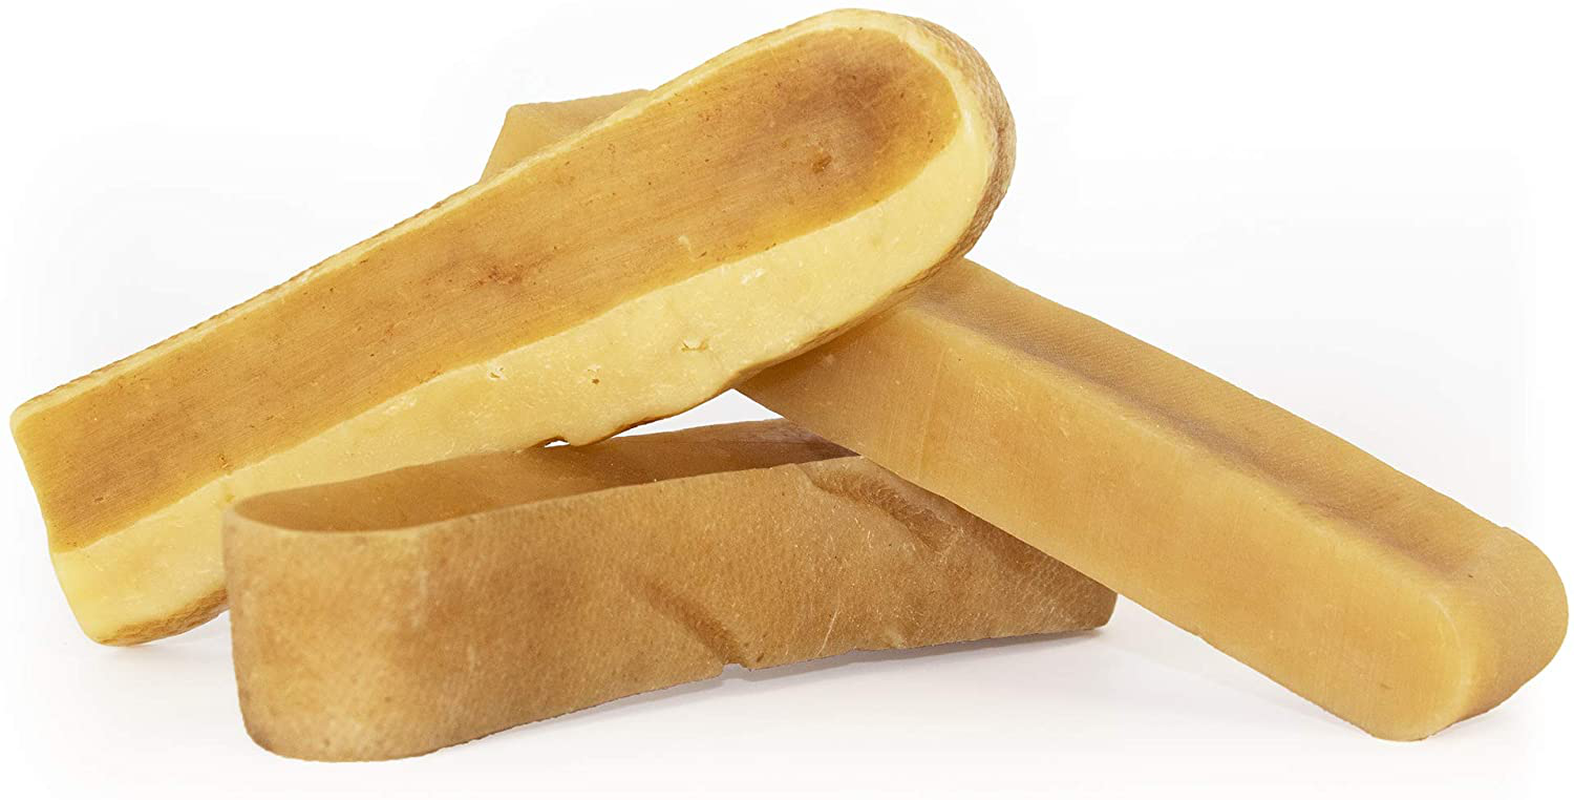 Himalayan Yak Cheese Dog Chews | the Original Himalayan Hard Cheese Dog Chew | 100% Natural, Healthy & Safe | No Lactose, Gluten or Grains | MIXED SIZES | for Dogs 65 Lbs & Smaller Animals & Pet Supplies > Pet Supplies > Dog Supplies > Dog Treats Himalayan Dog Chew   